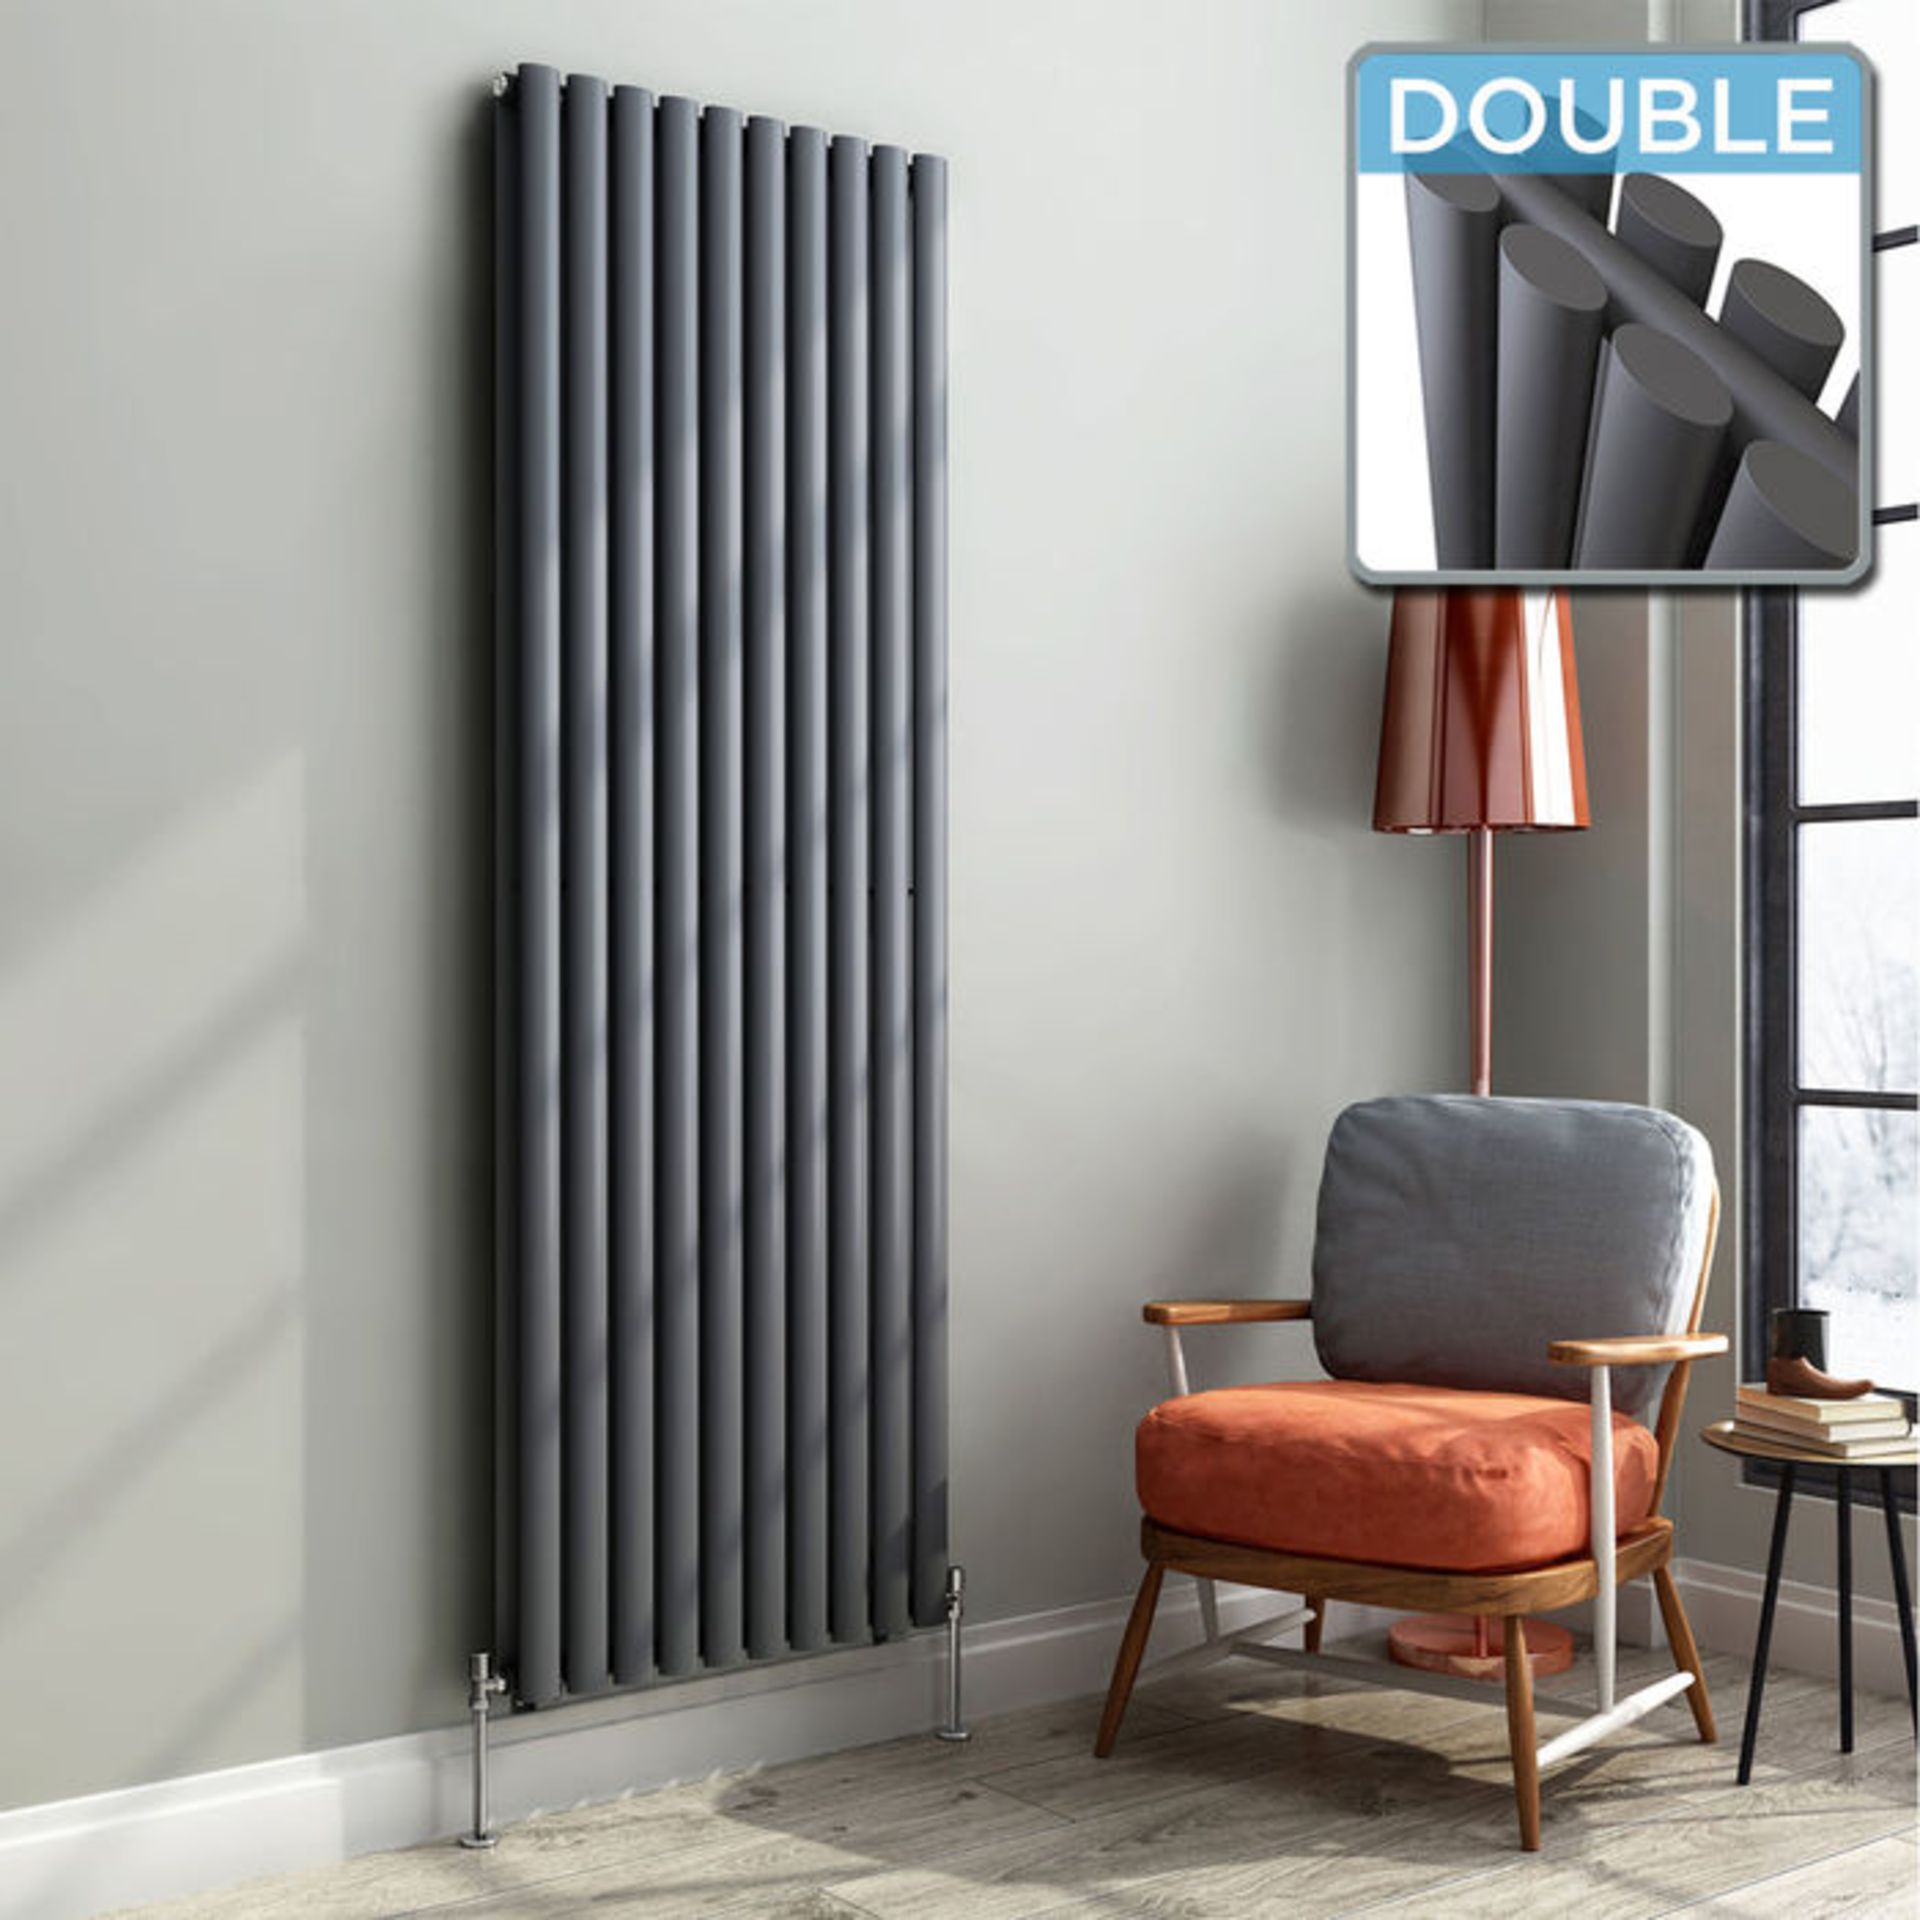 (ZA142) 1800x600mm Anthracite Double Panel Oval Tube Vertical Premium Radiator. RRP £599.99. Made - Image 3 of 5